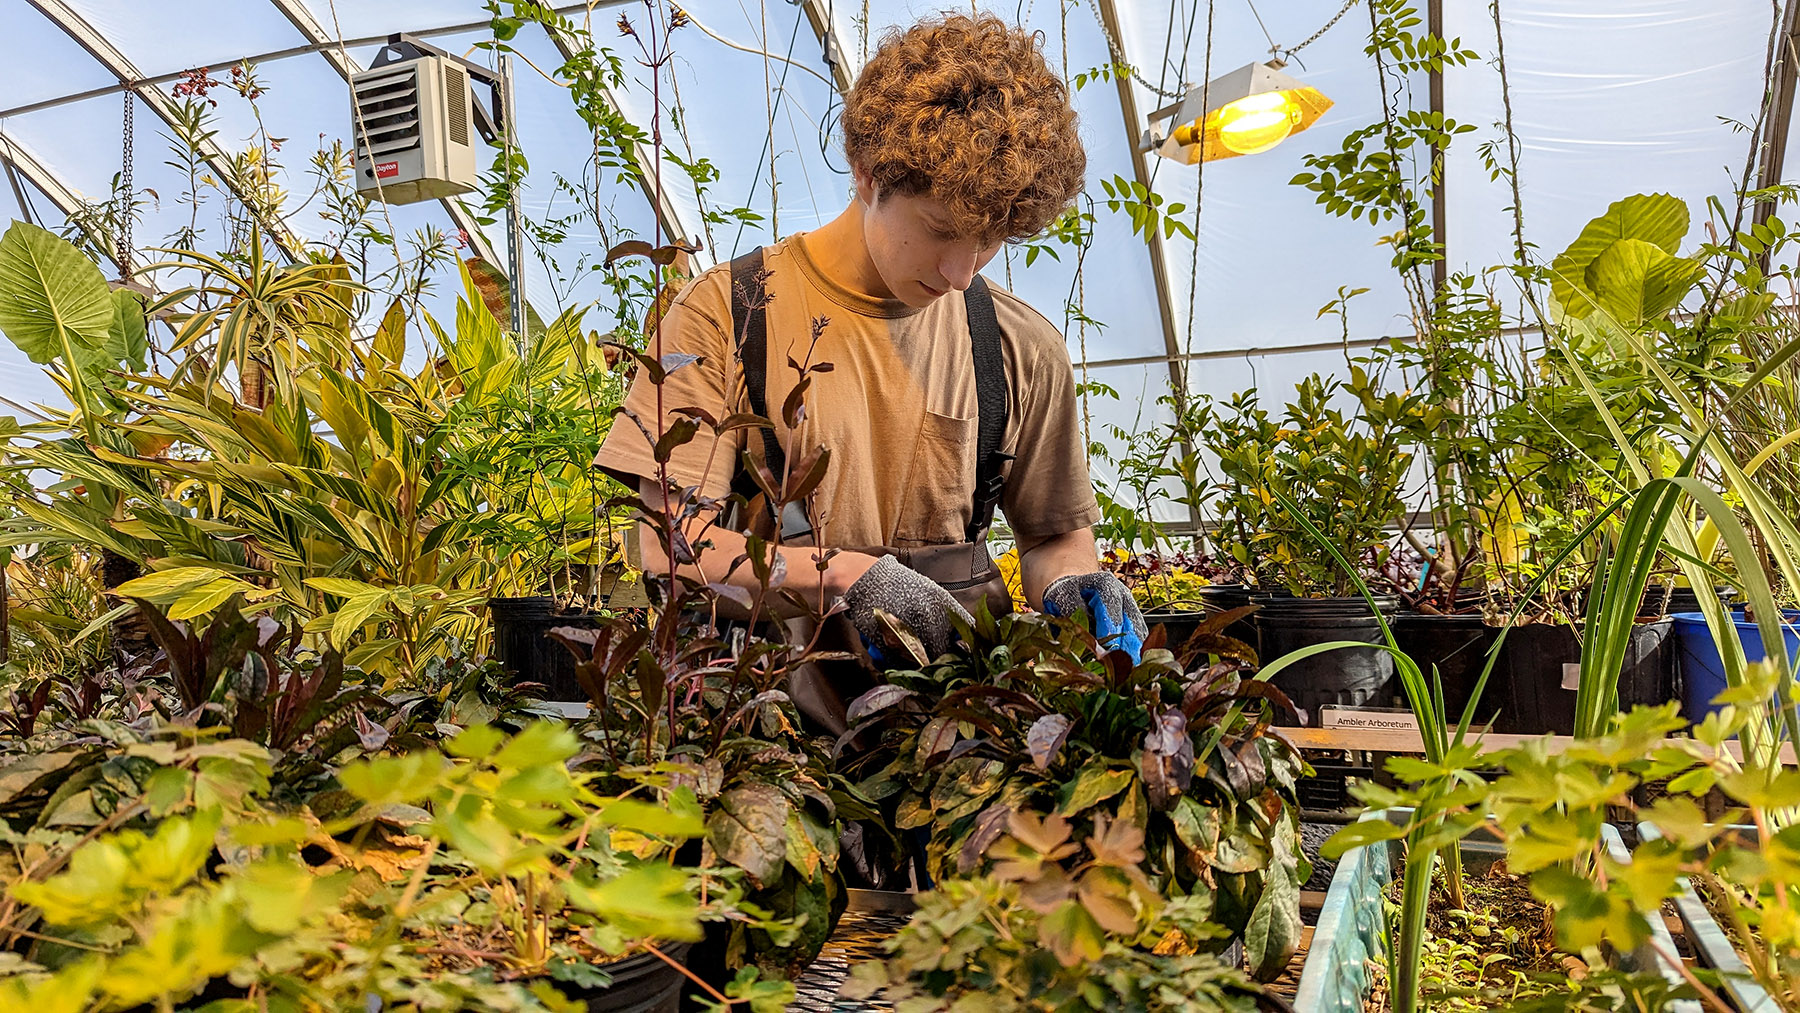 A student works with the plants for Temples 2023 Philadelphia Flower Show exhibit.